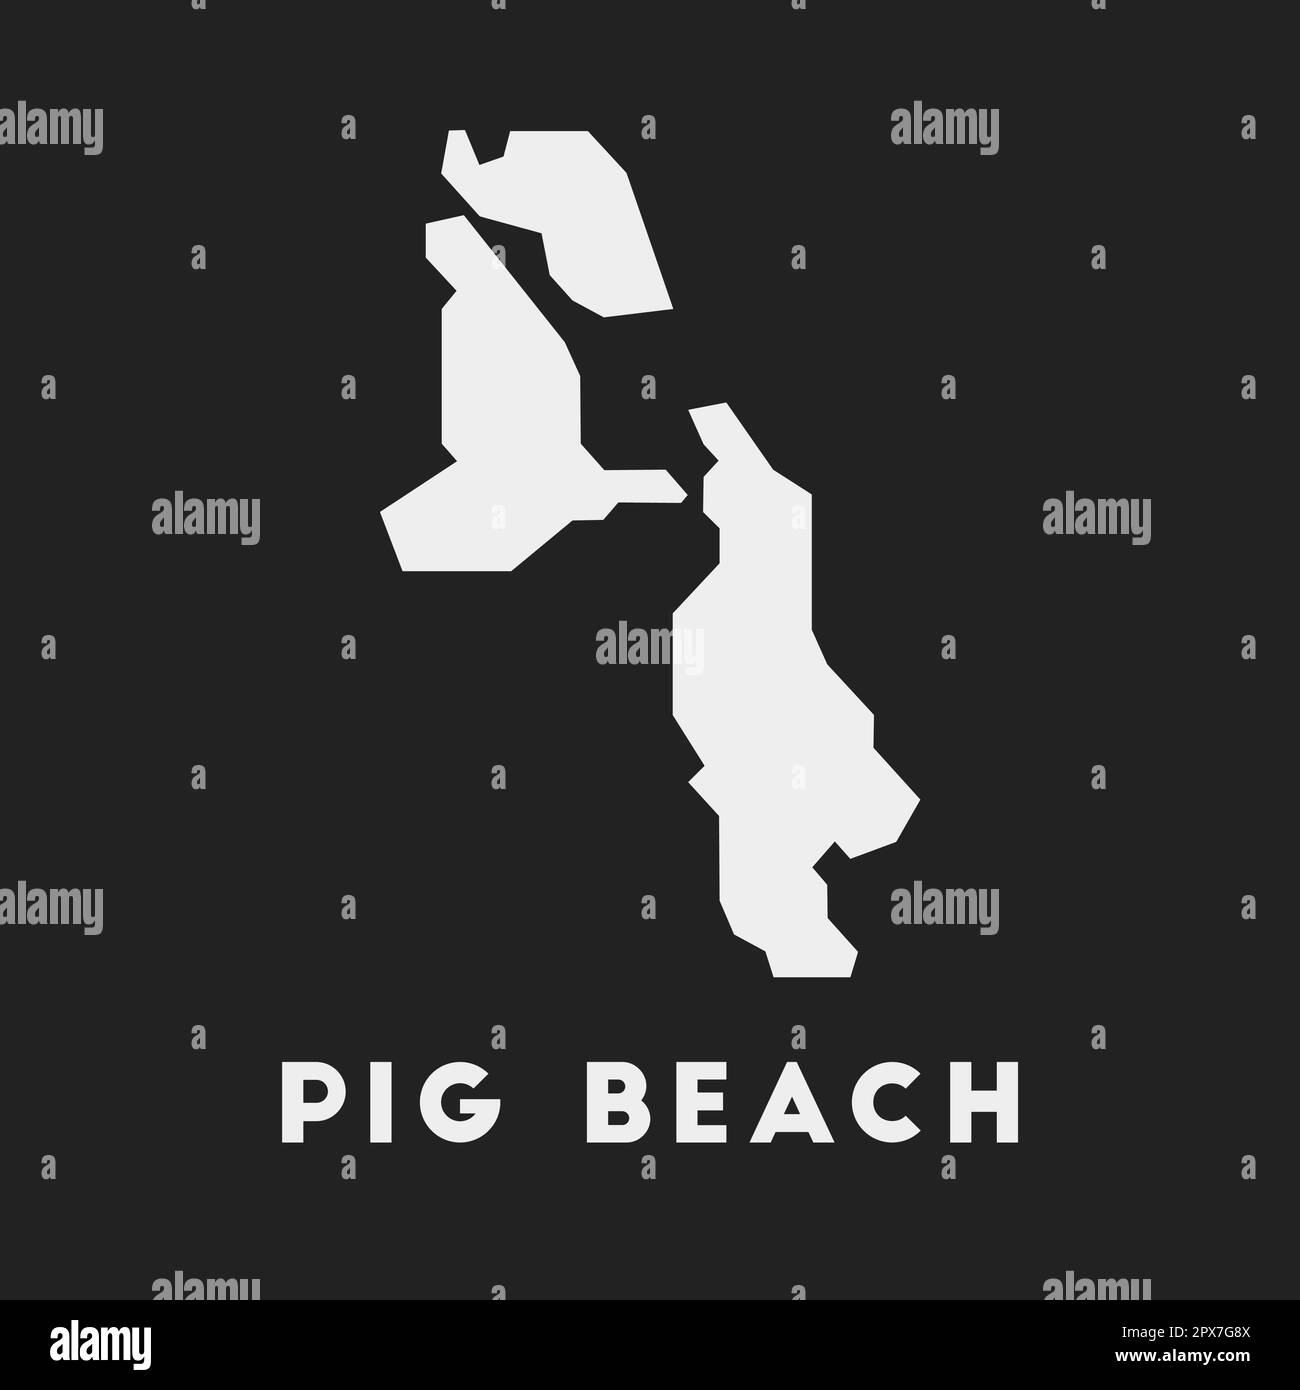 Pig Beach icon. Island map on dark background. Stylish Pig Beach map with island name. Vector illustration. Stock Vector